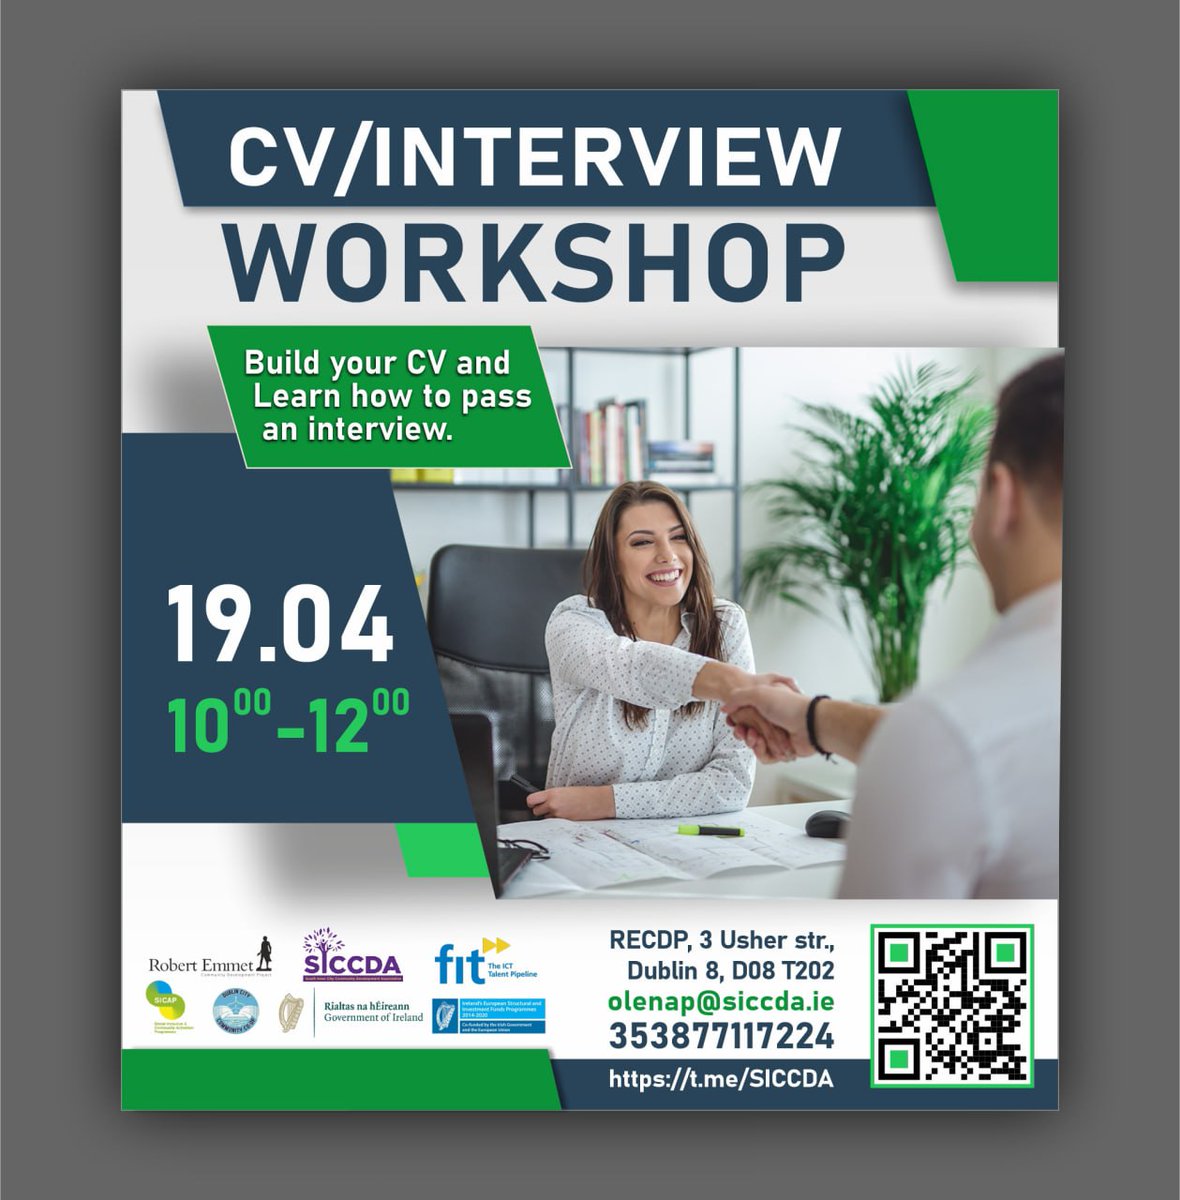 Elevate your career! Join our workshop to master CV writing, interview techniques, and personal branding. 📅 Date: 19th April 2024 ⏰ Time: 10am - 12pm 📍 Location: Robert Emmet CDP, 3 Usher Street, Dublin 8 Contact olenap@siccda.ie for more information #IntegrationProgramme